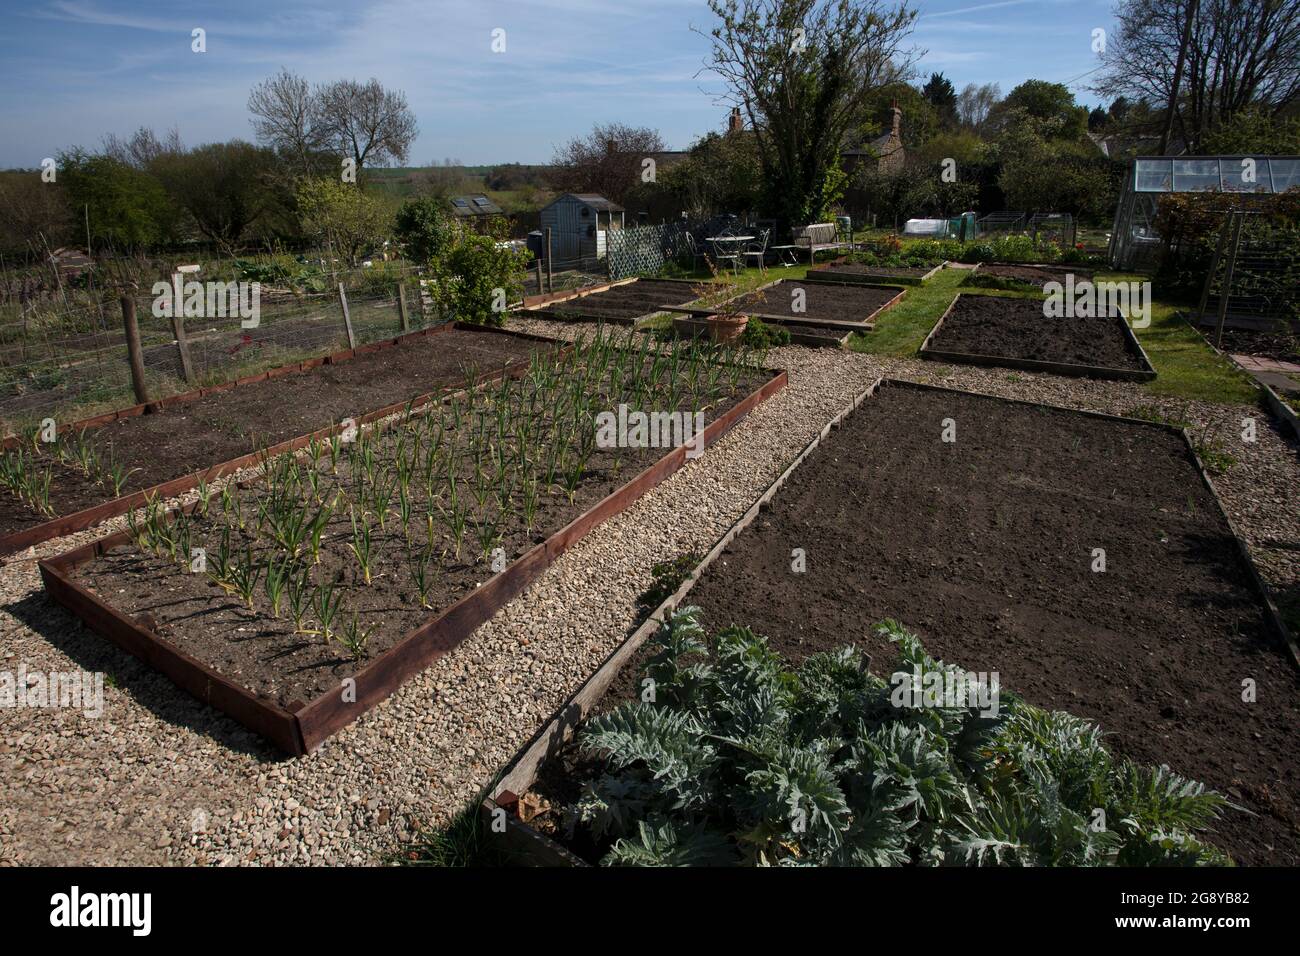 Raised beds and gravel paths on english allotment,England Stock Photo